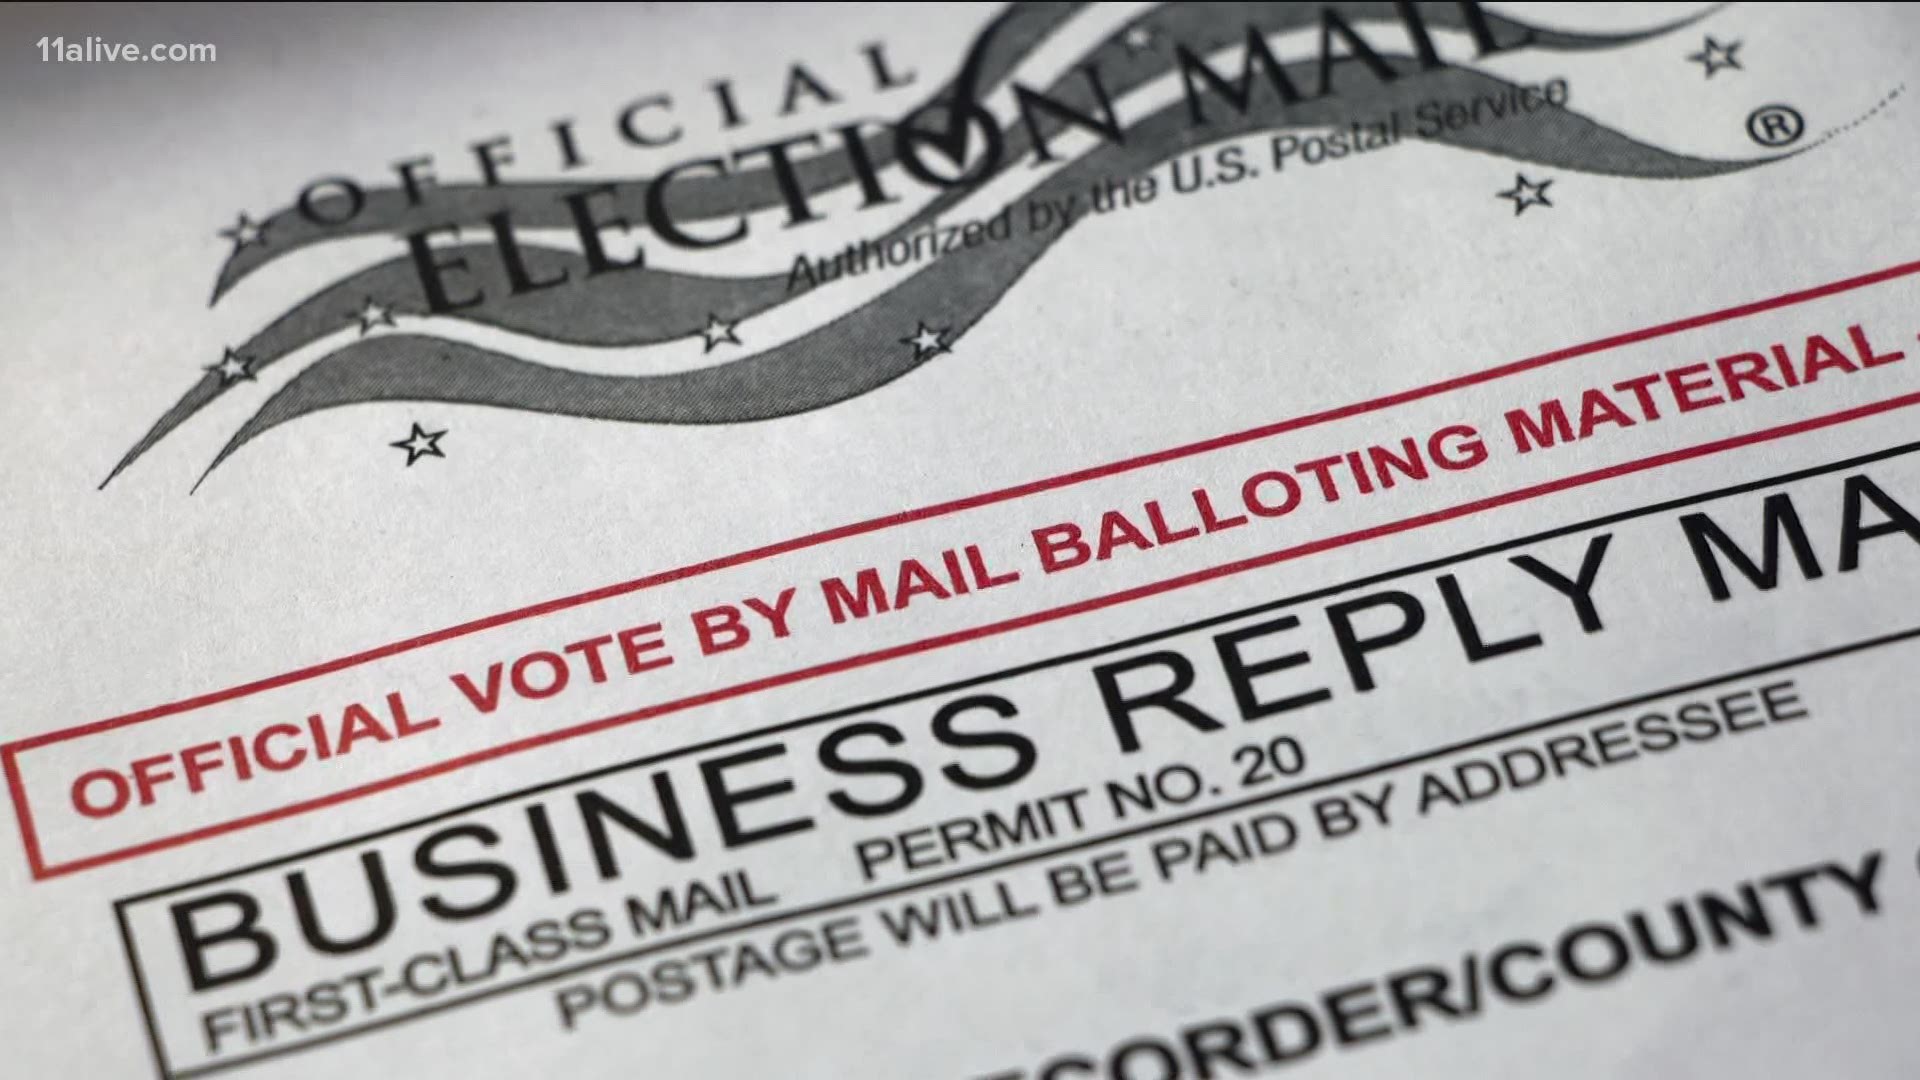 There are several reasons an absentee ballot might have been rejected.